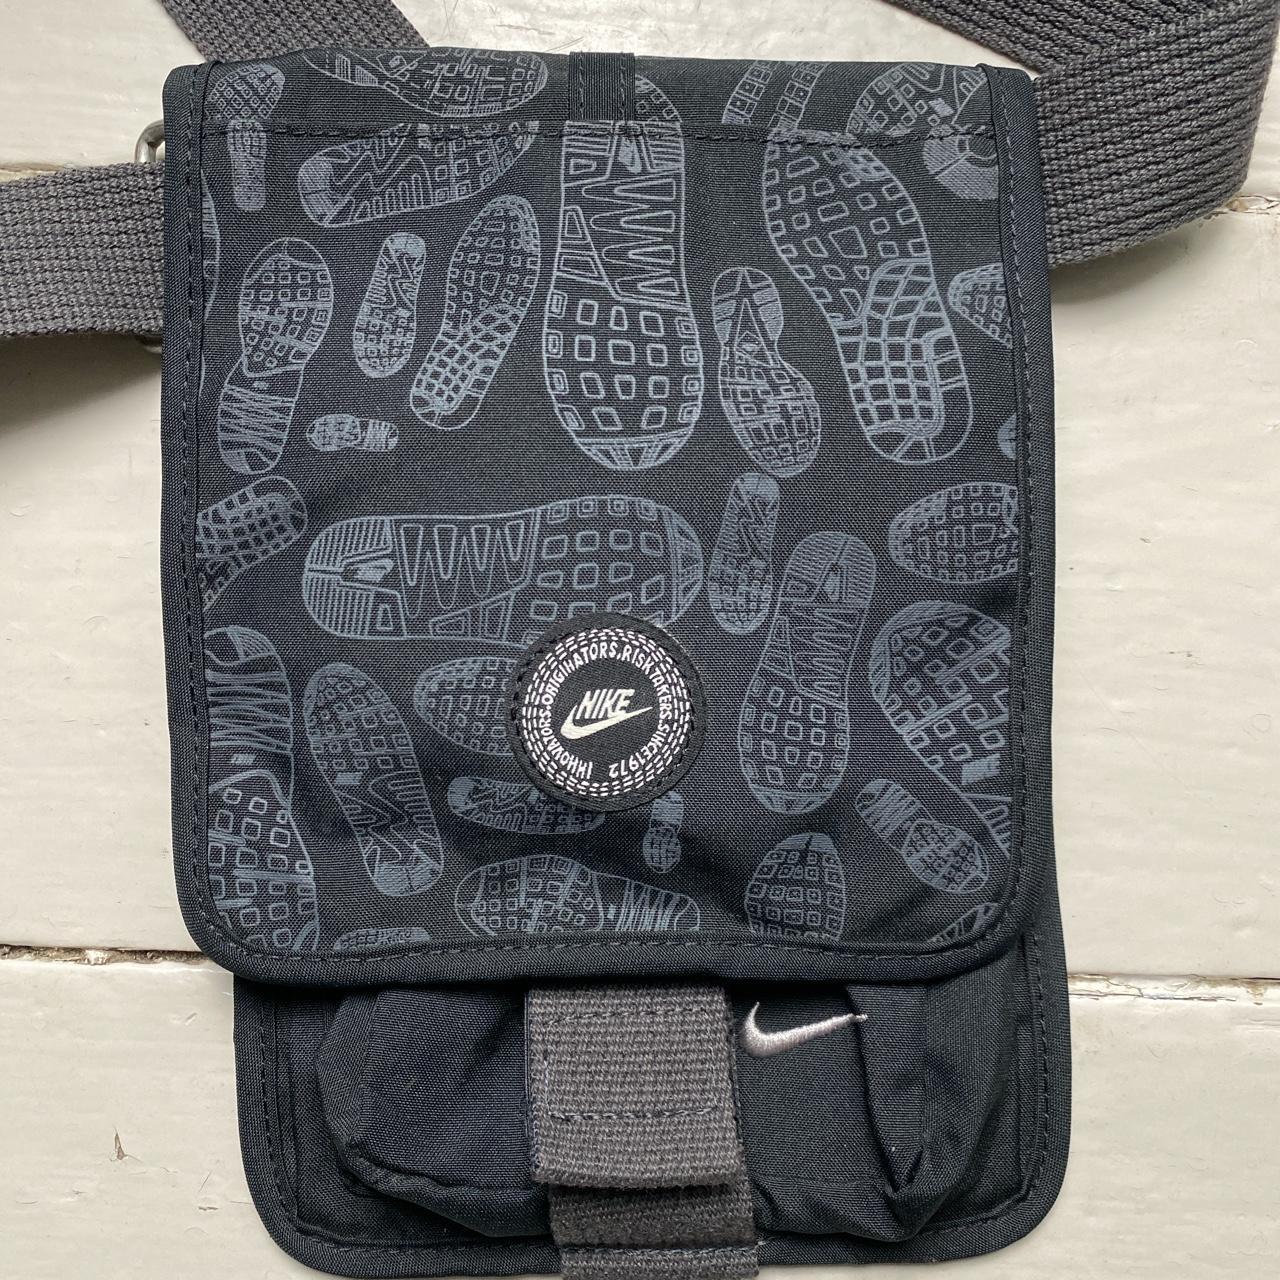 Nike Air Max Vintage Small Pouch Black and White Bag